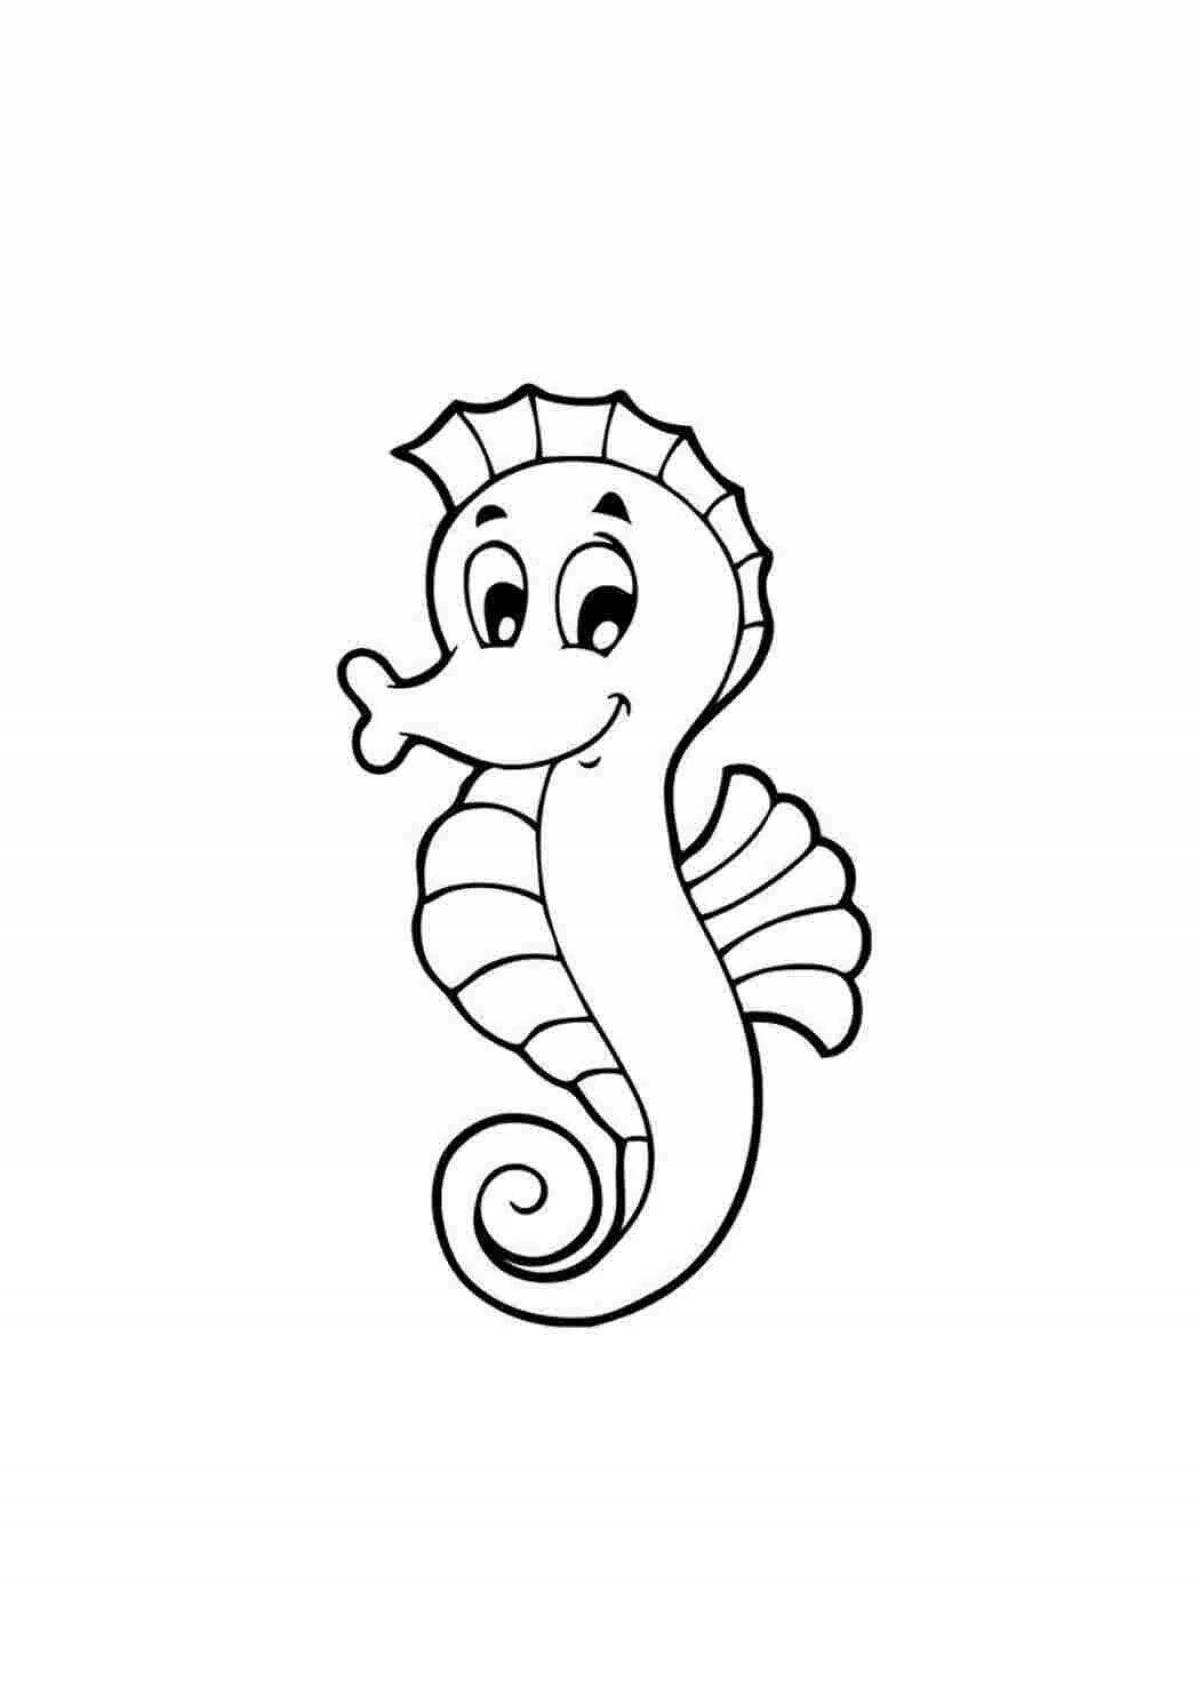 Sweet seahorse coloring pages for kids